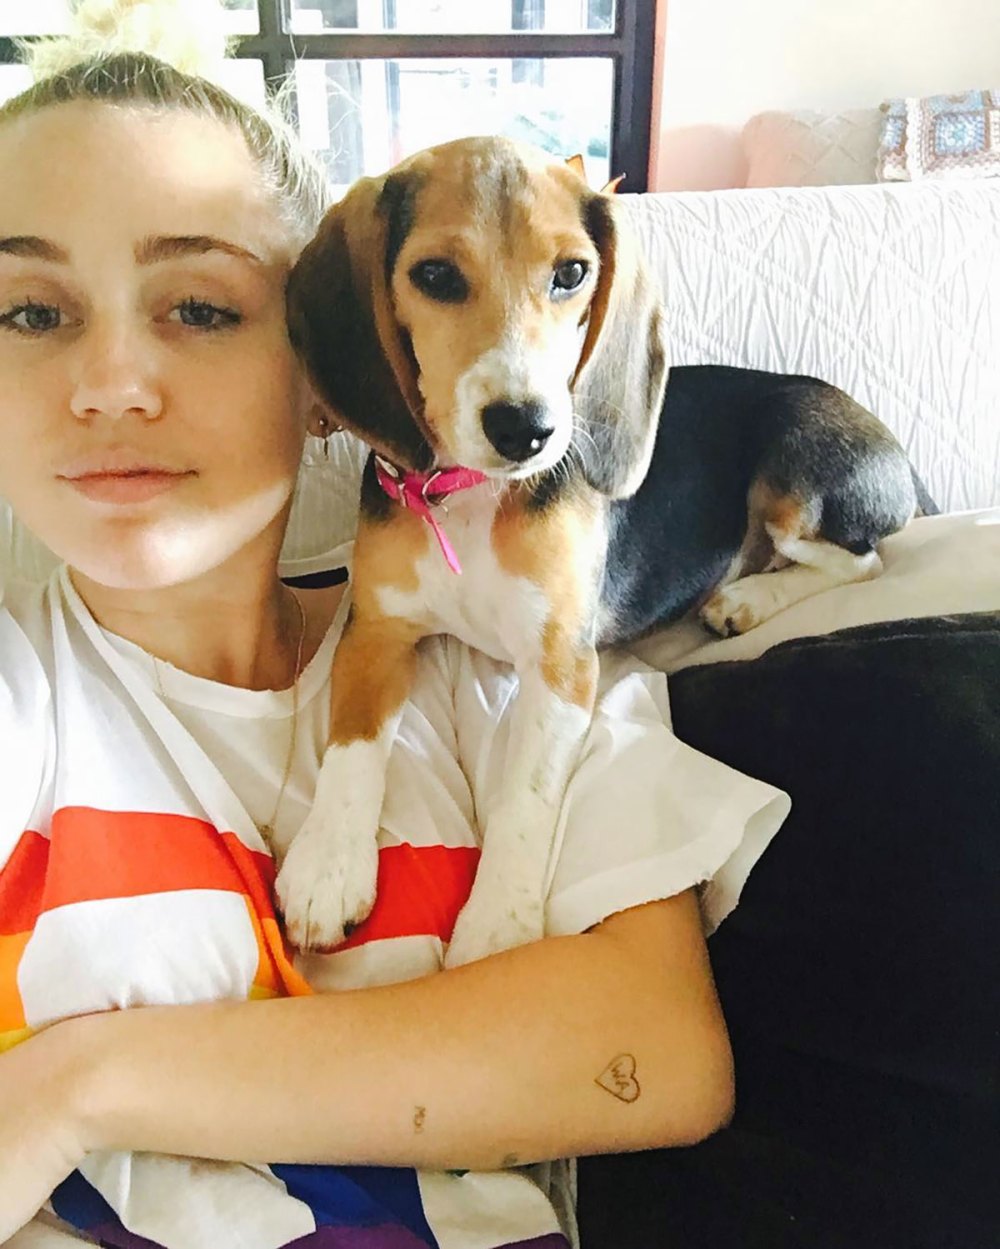 Miley Cyrus Says Her Dog Was Electrocuted on ‘The Voice’ Set But Is ‘Fine’ Now